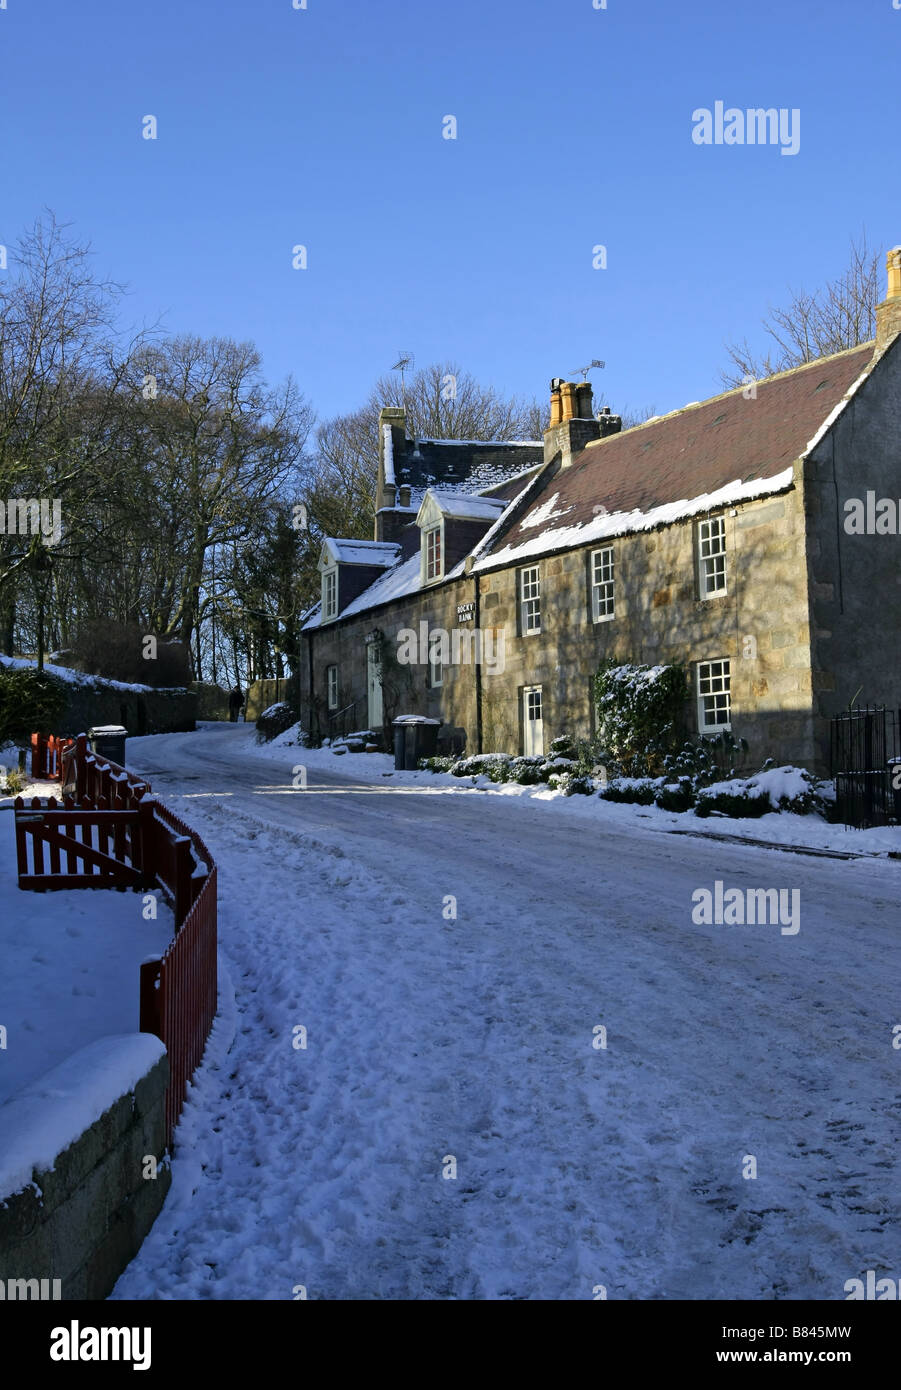 Houses at the Bridge of Balgownie in Old Aberdeen in Aberdeen, Scotland, UK, seen covered in snow and ice during winter Stock Photo